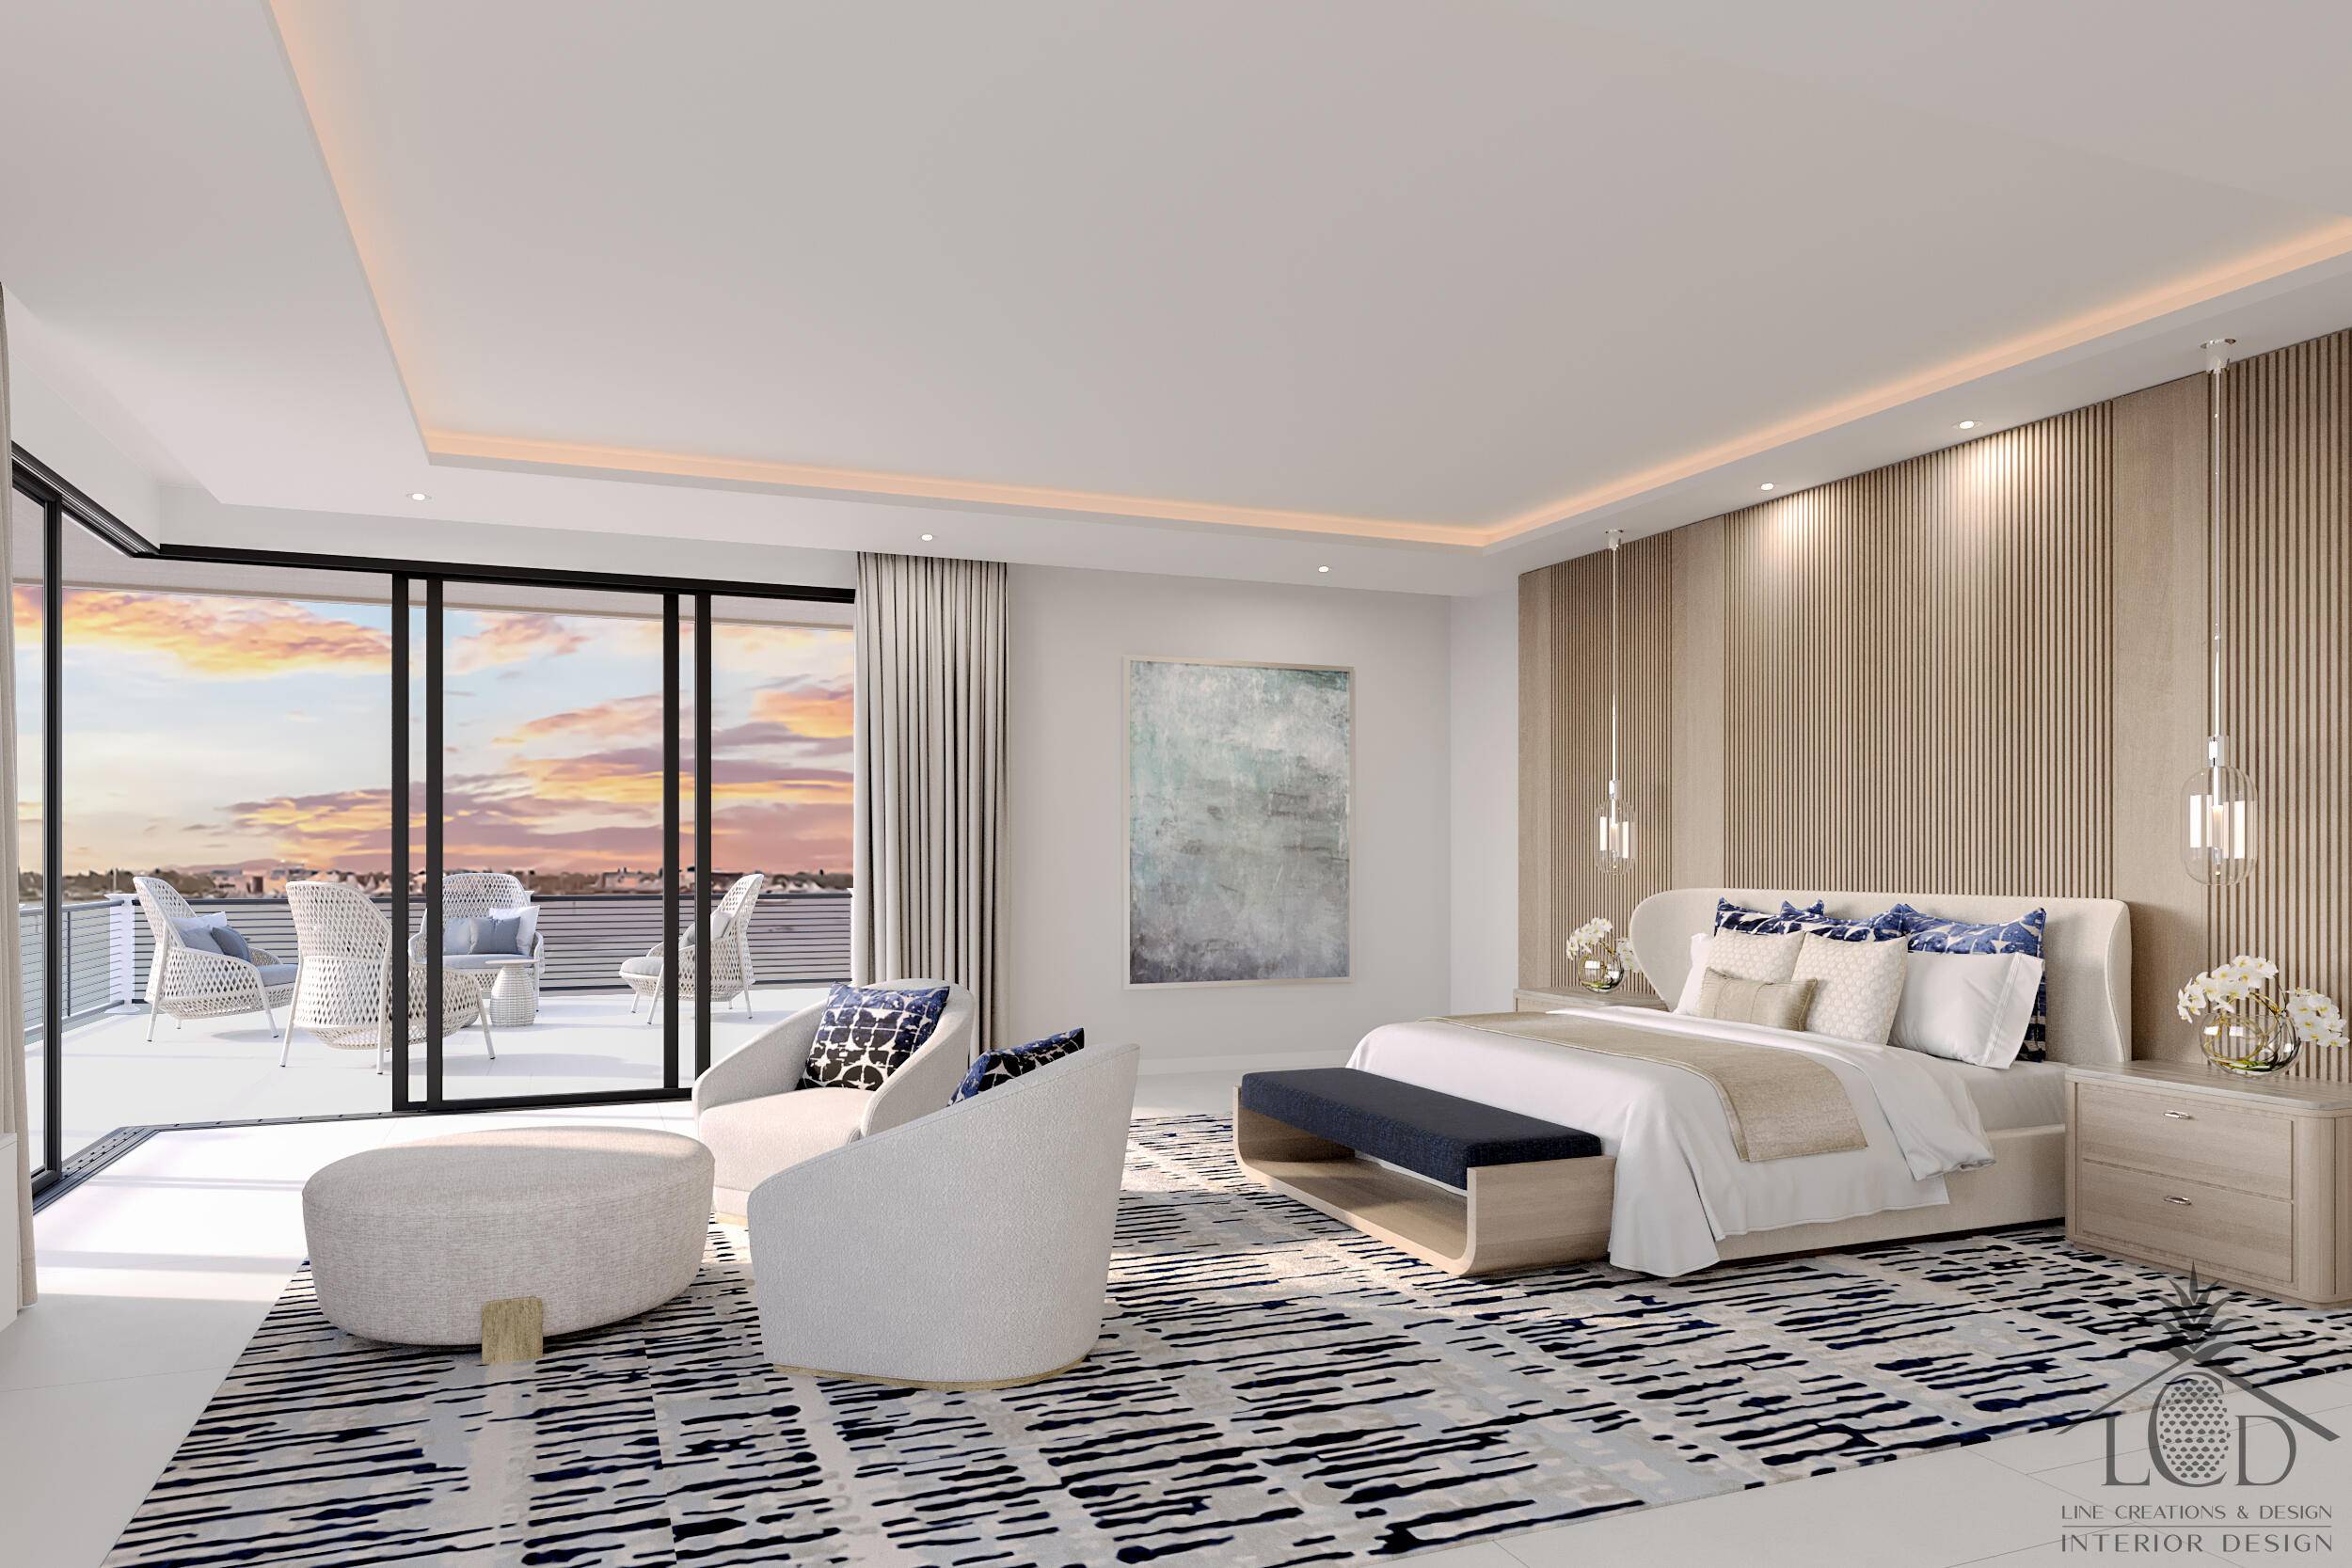 Introducing The Driftwood Singer Island, where modern luxury living reaches new heights with our exquisite Penthouse unit.